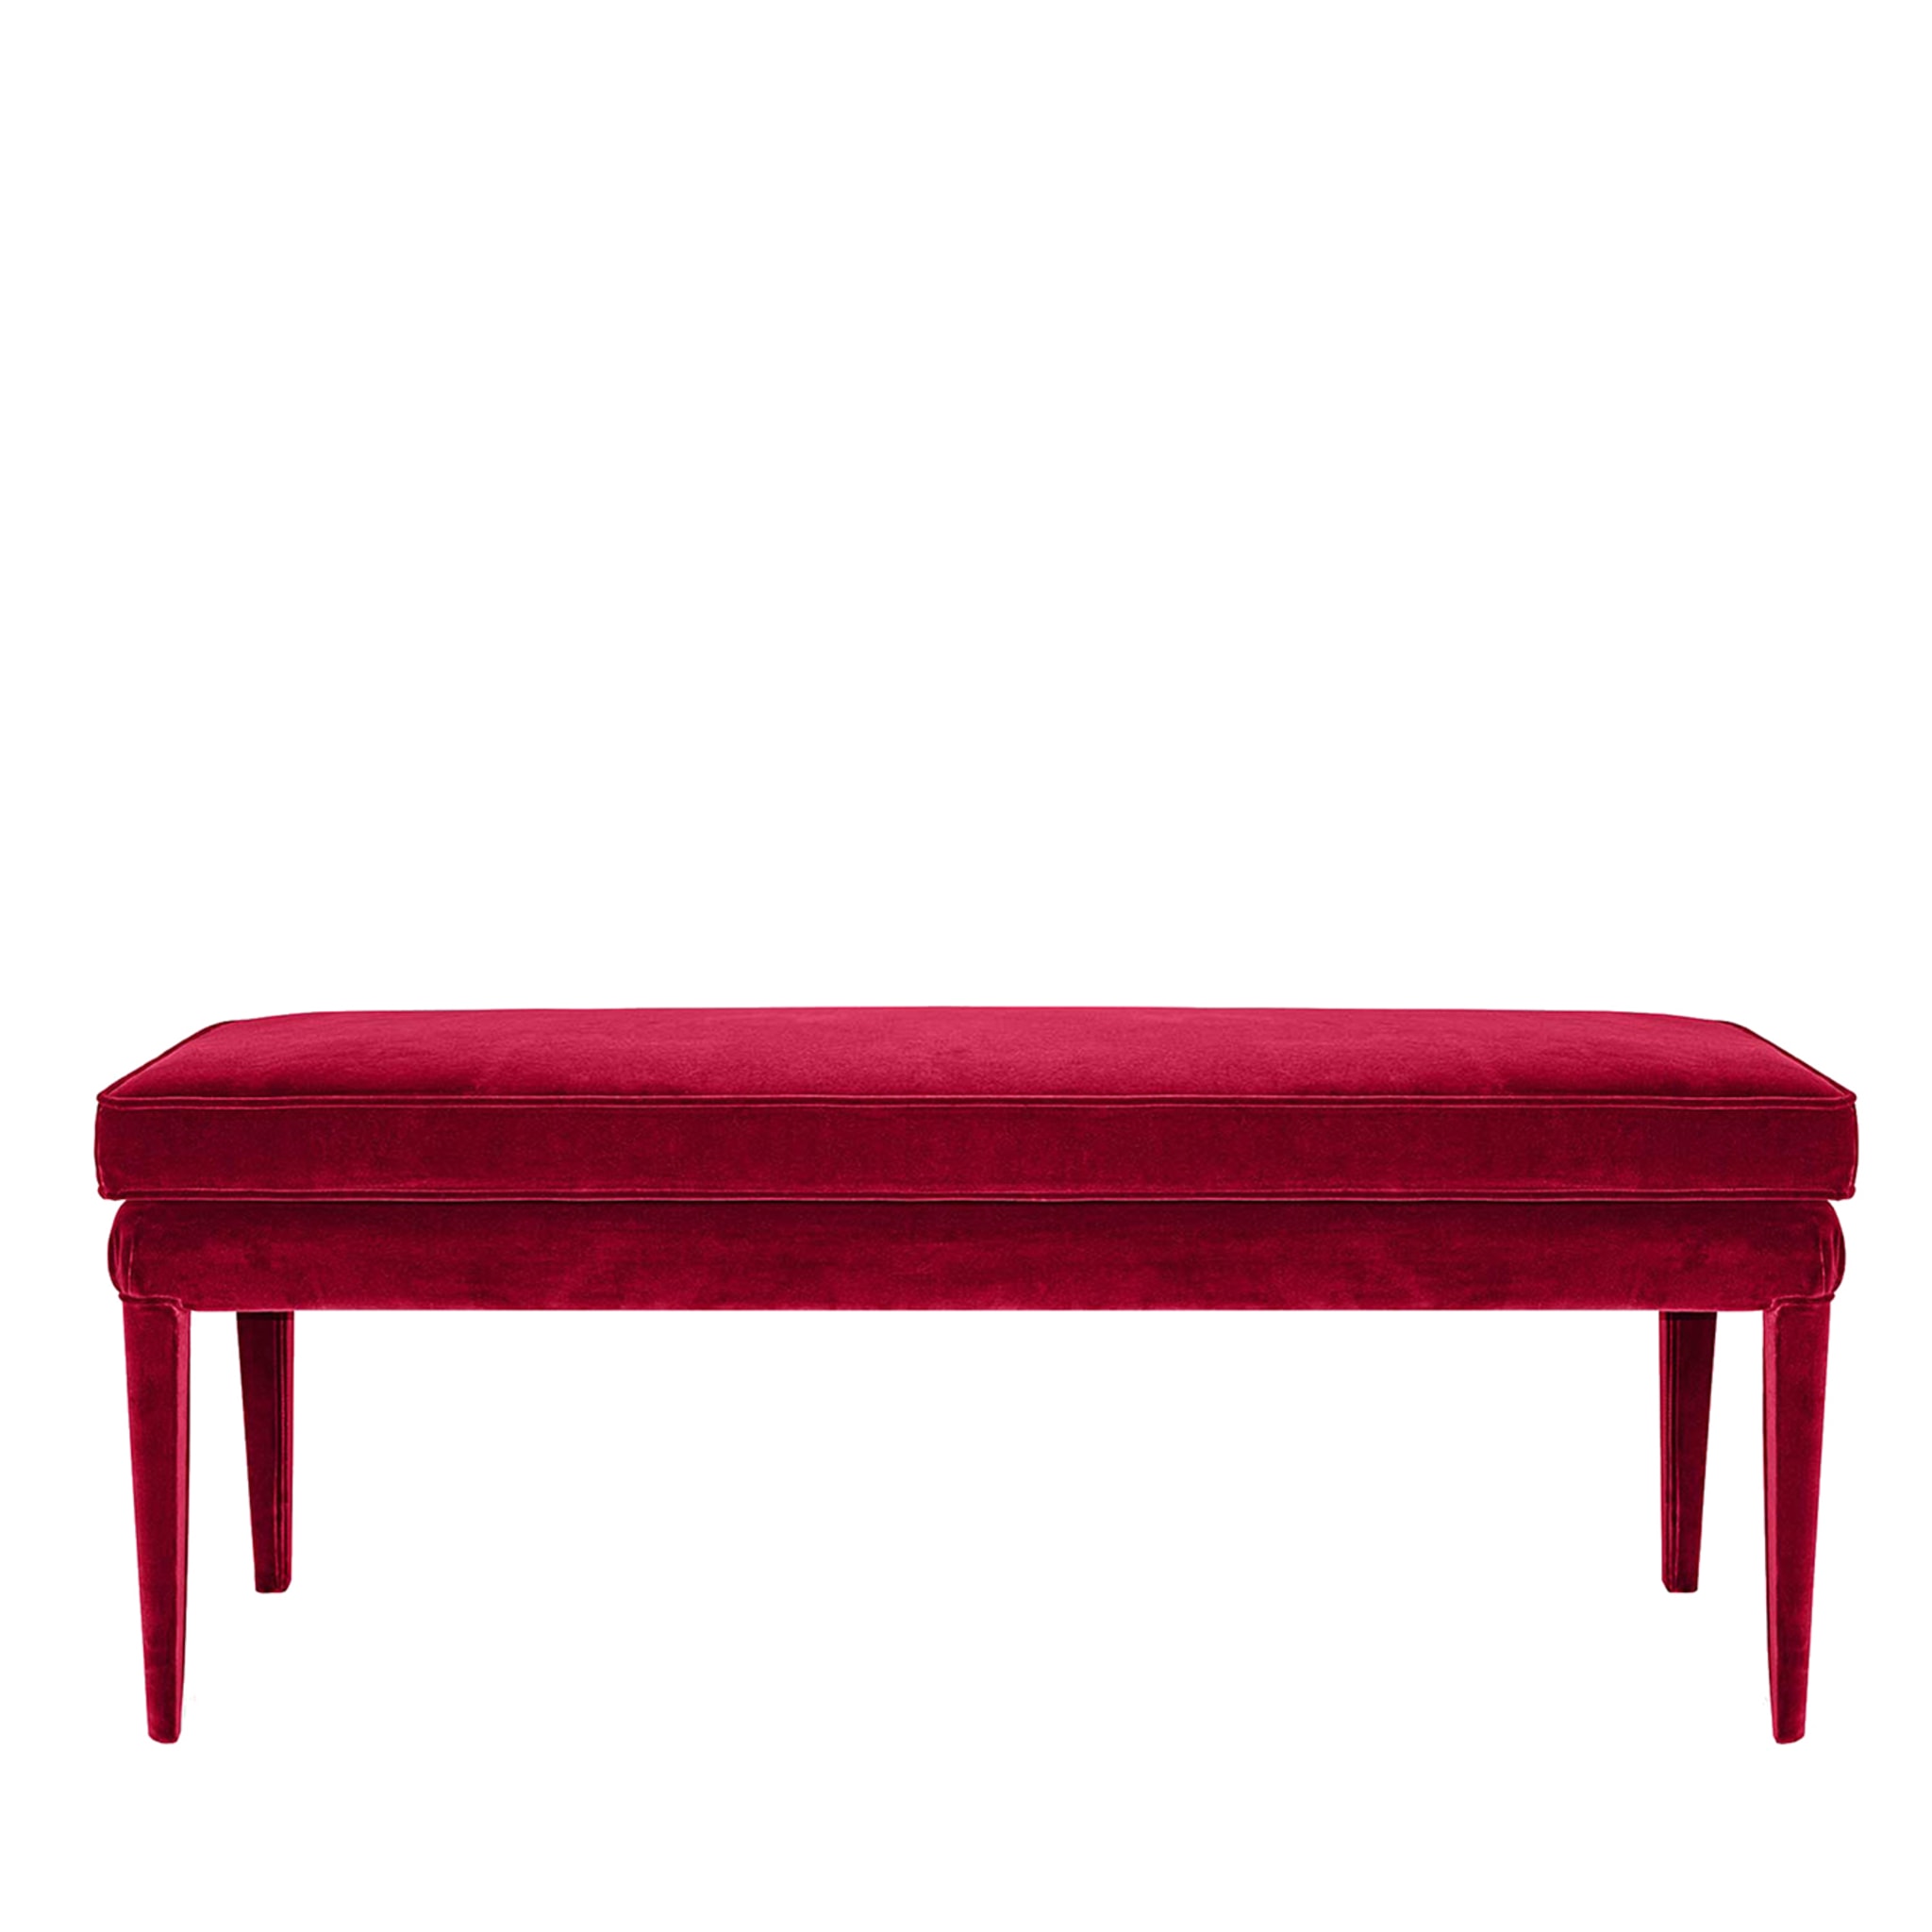 LIBELLULA ECO Red Passion Velvet Bench - Main view